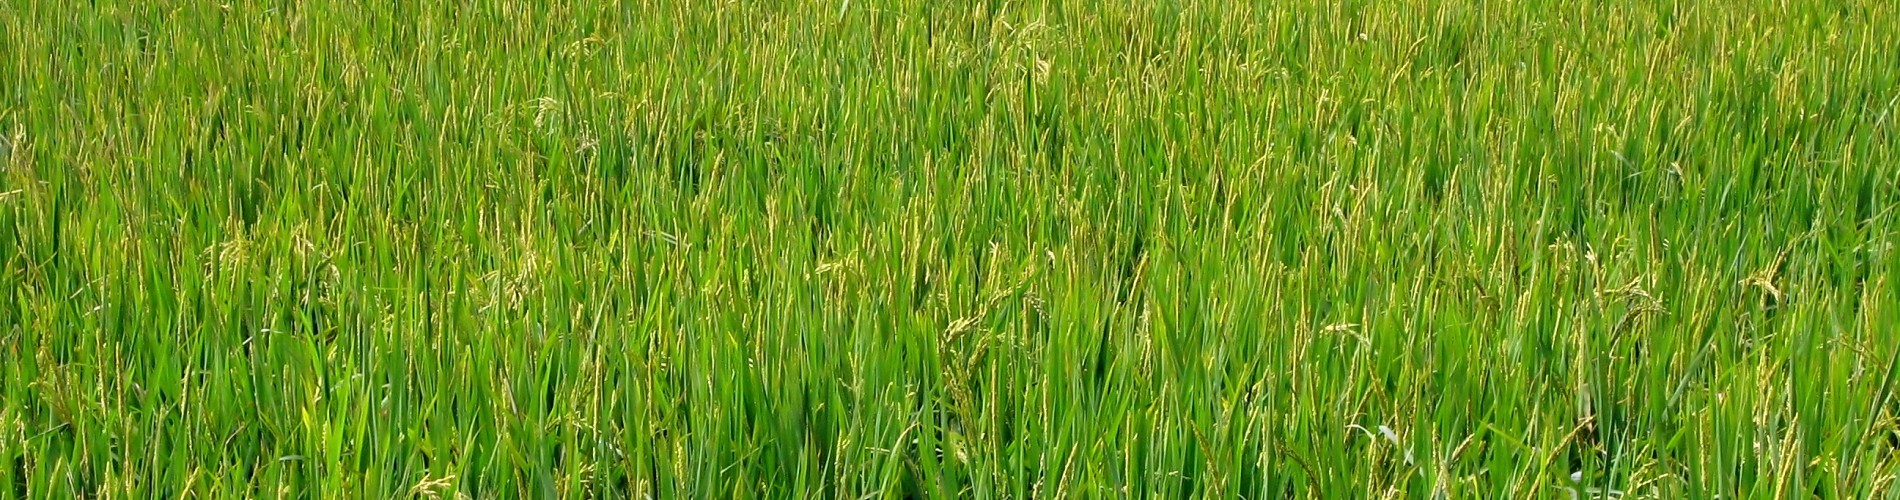 Large Chinese Rice Field